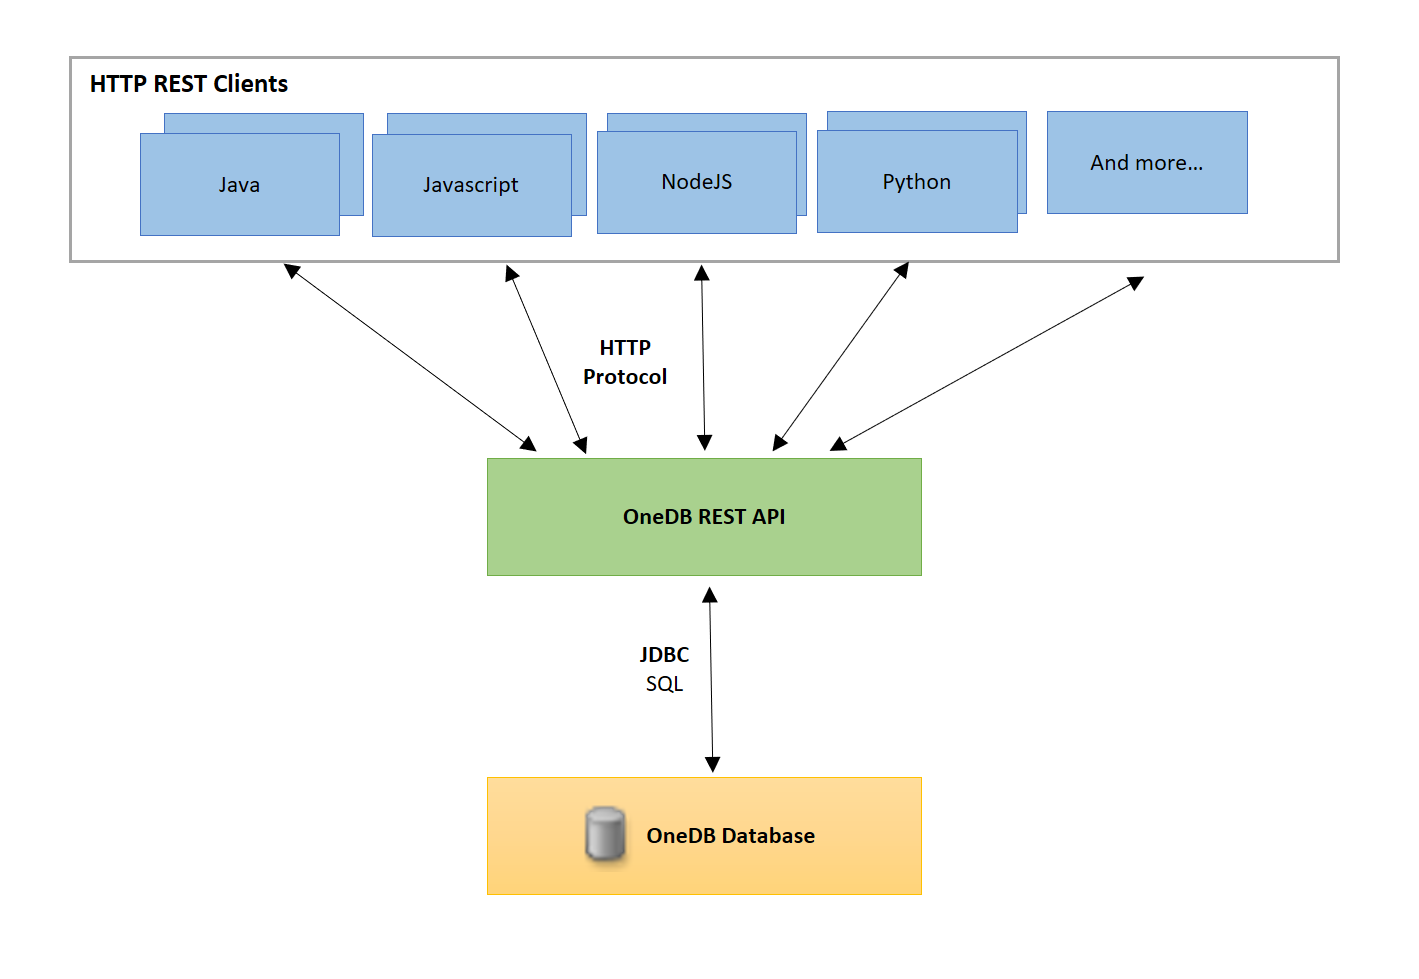 This graphic depicts the REST API architecture in HCL OneDB.